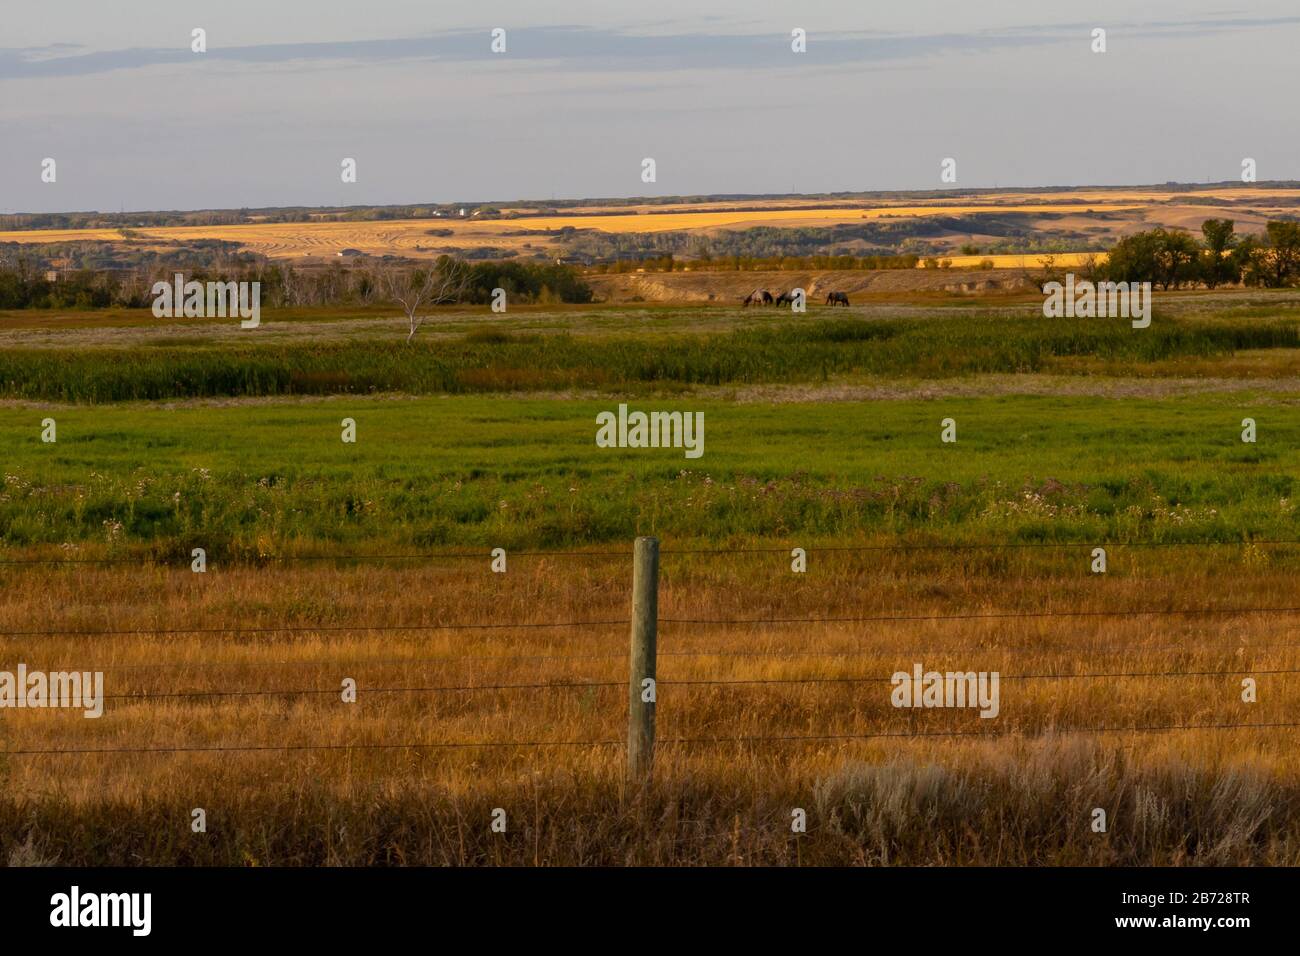 A view of distant pasture lands in the rural country side of the Saskatchewan prairies Stock Photo